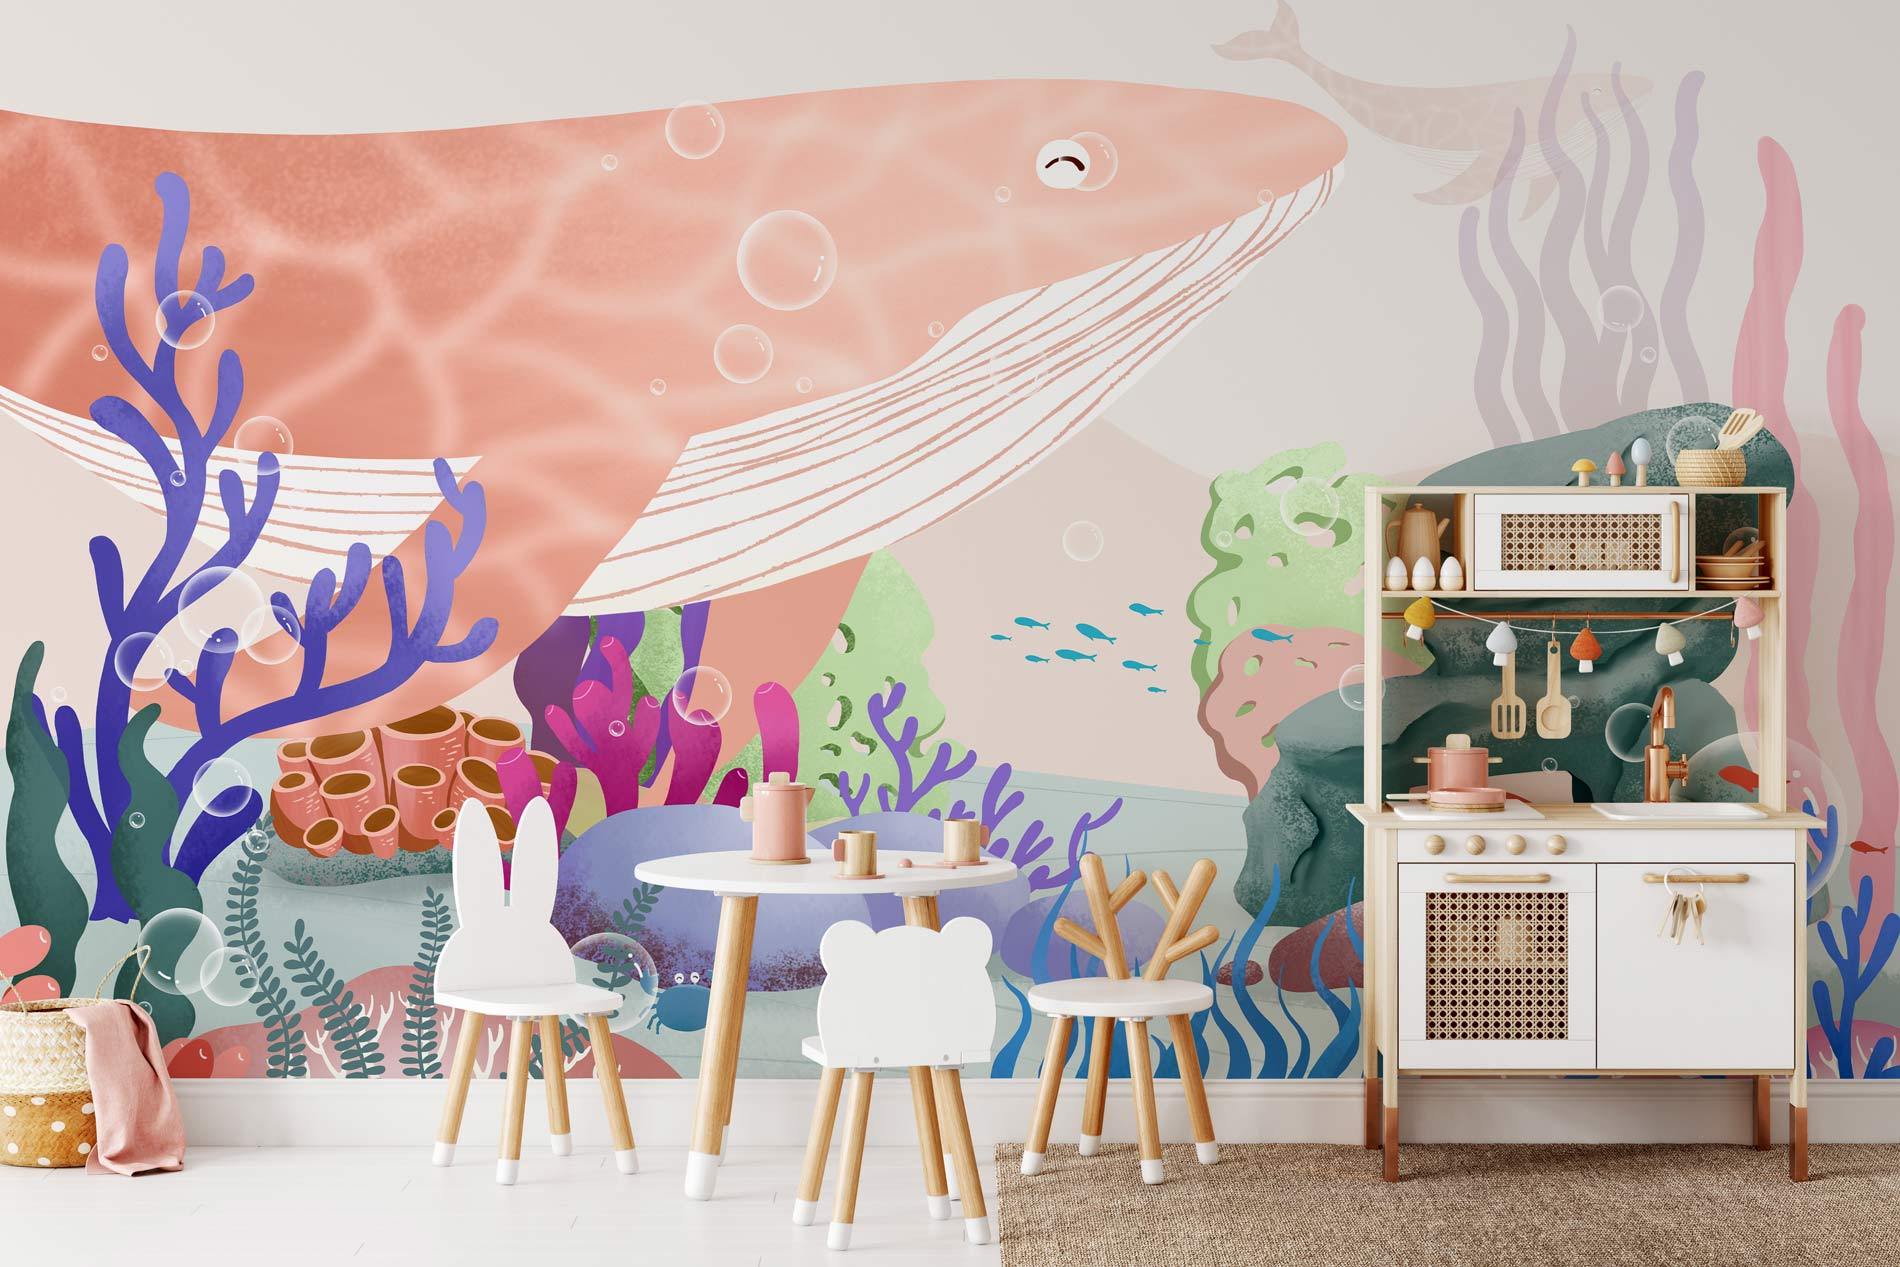 Wallpaper Mural of Seabed Animals for Children's Room Decoration